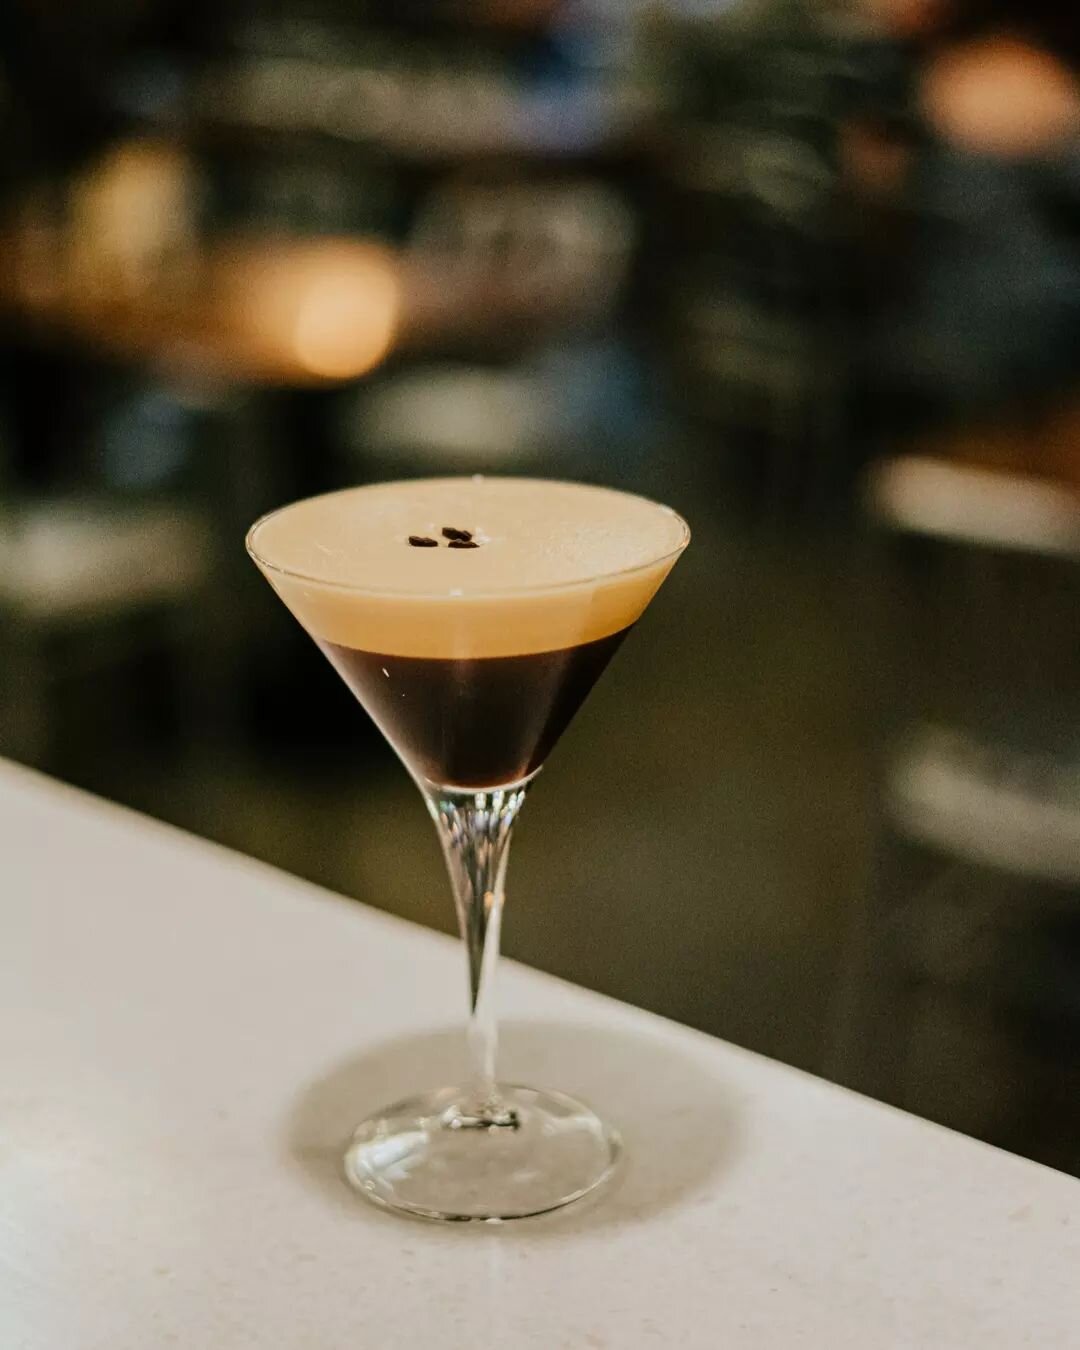 Our Espresso Martinis are a must-have this weekend!

Don't forget our cocktails are discounted during happy hour&nbsp;🍸 &nbsp;

For bookings follow&nbsp;https://bit.ly/3wFVa40